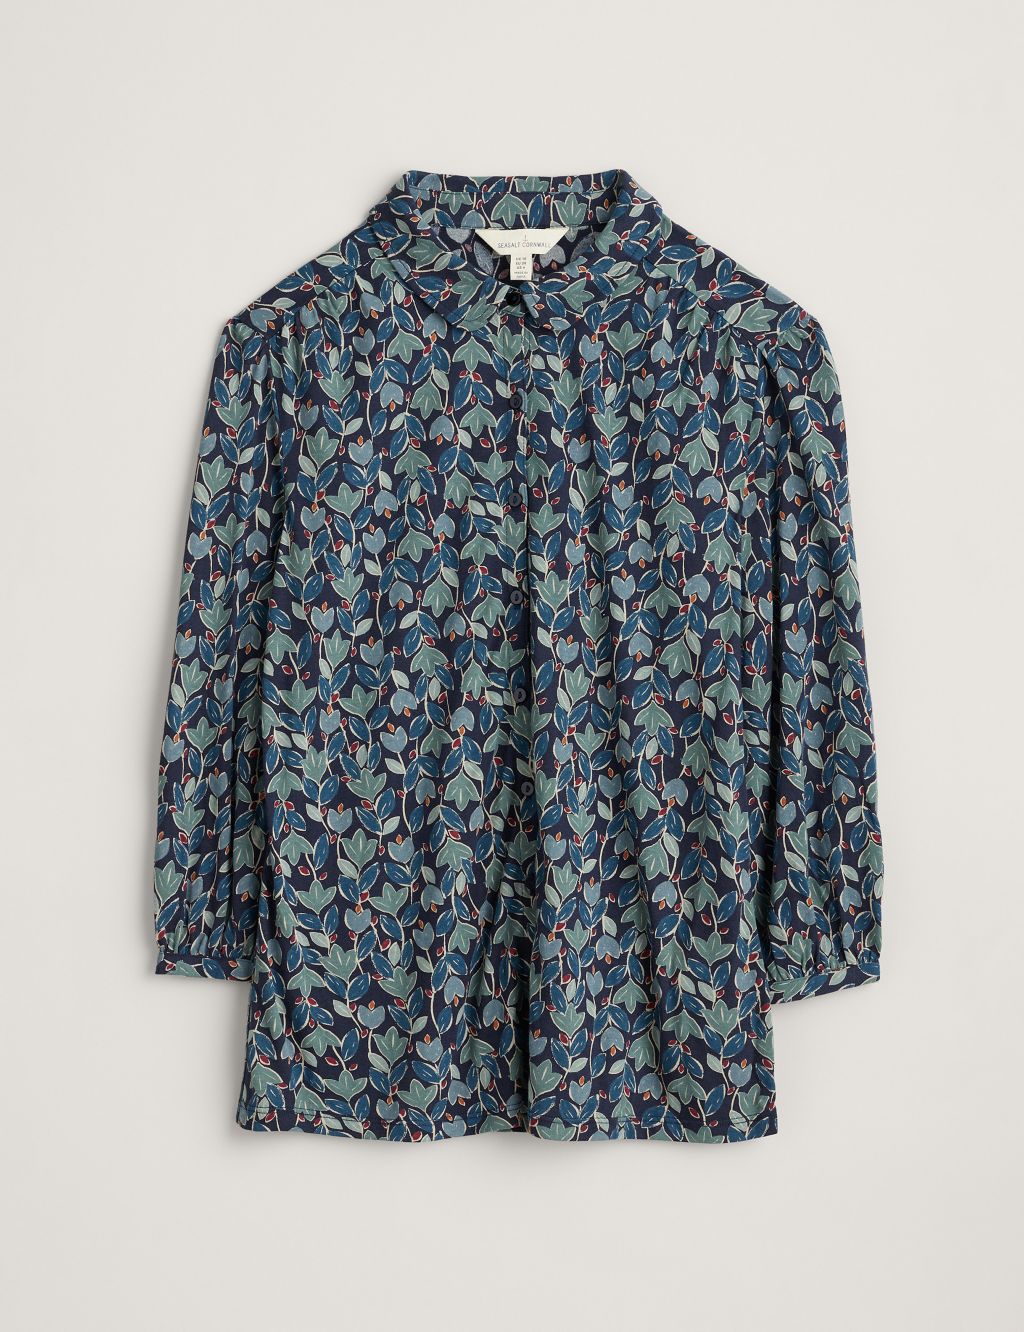 Cotton Modal Blend Floral Collared Shirt image 2